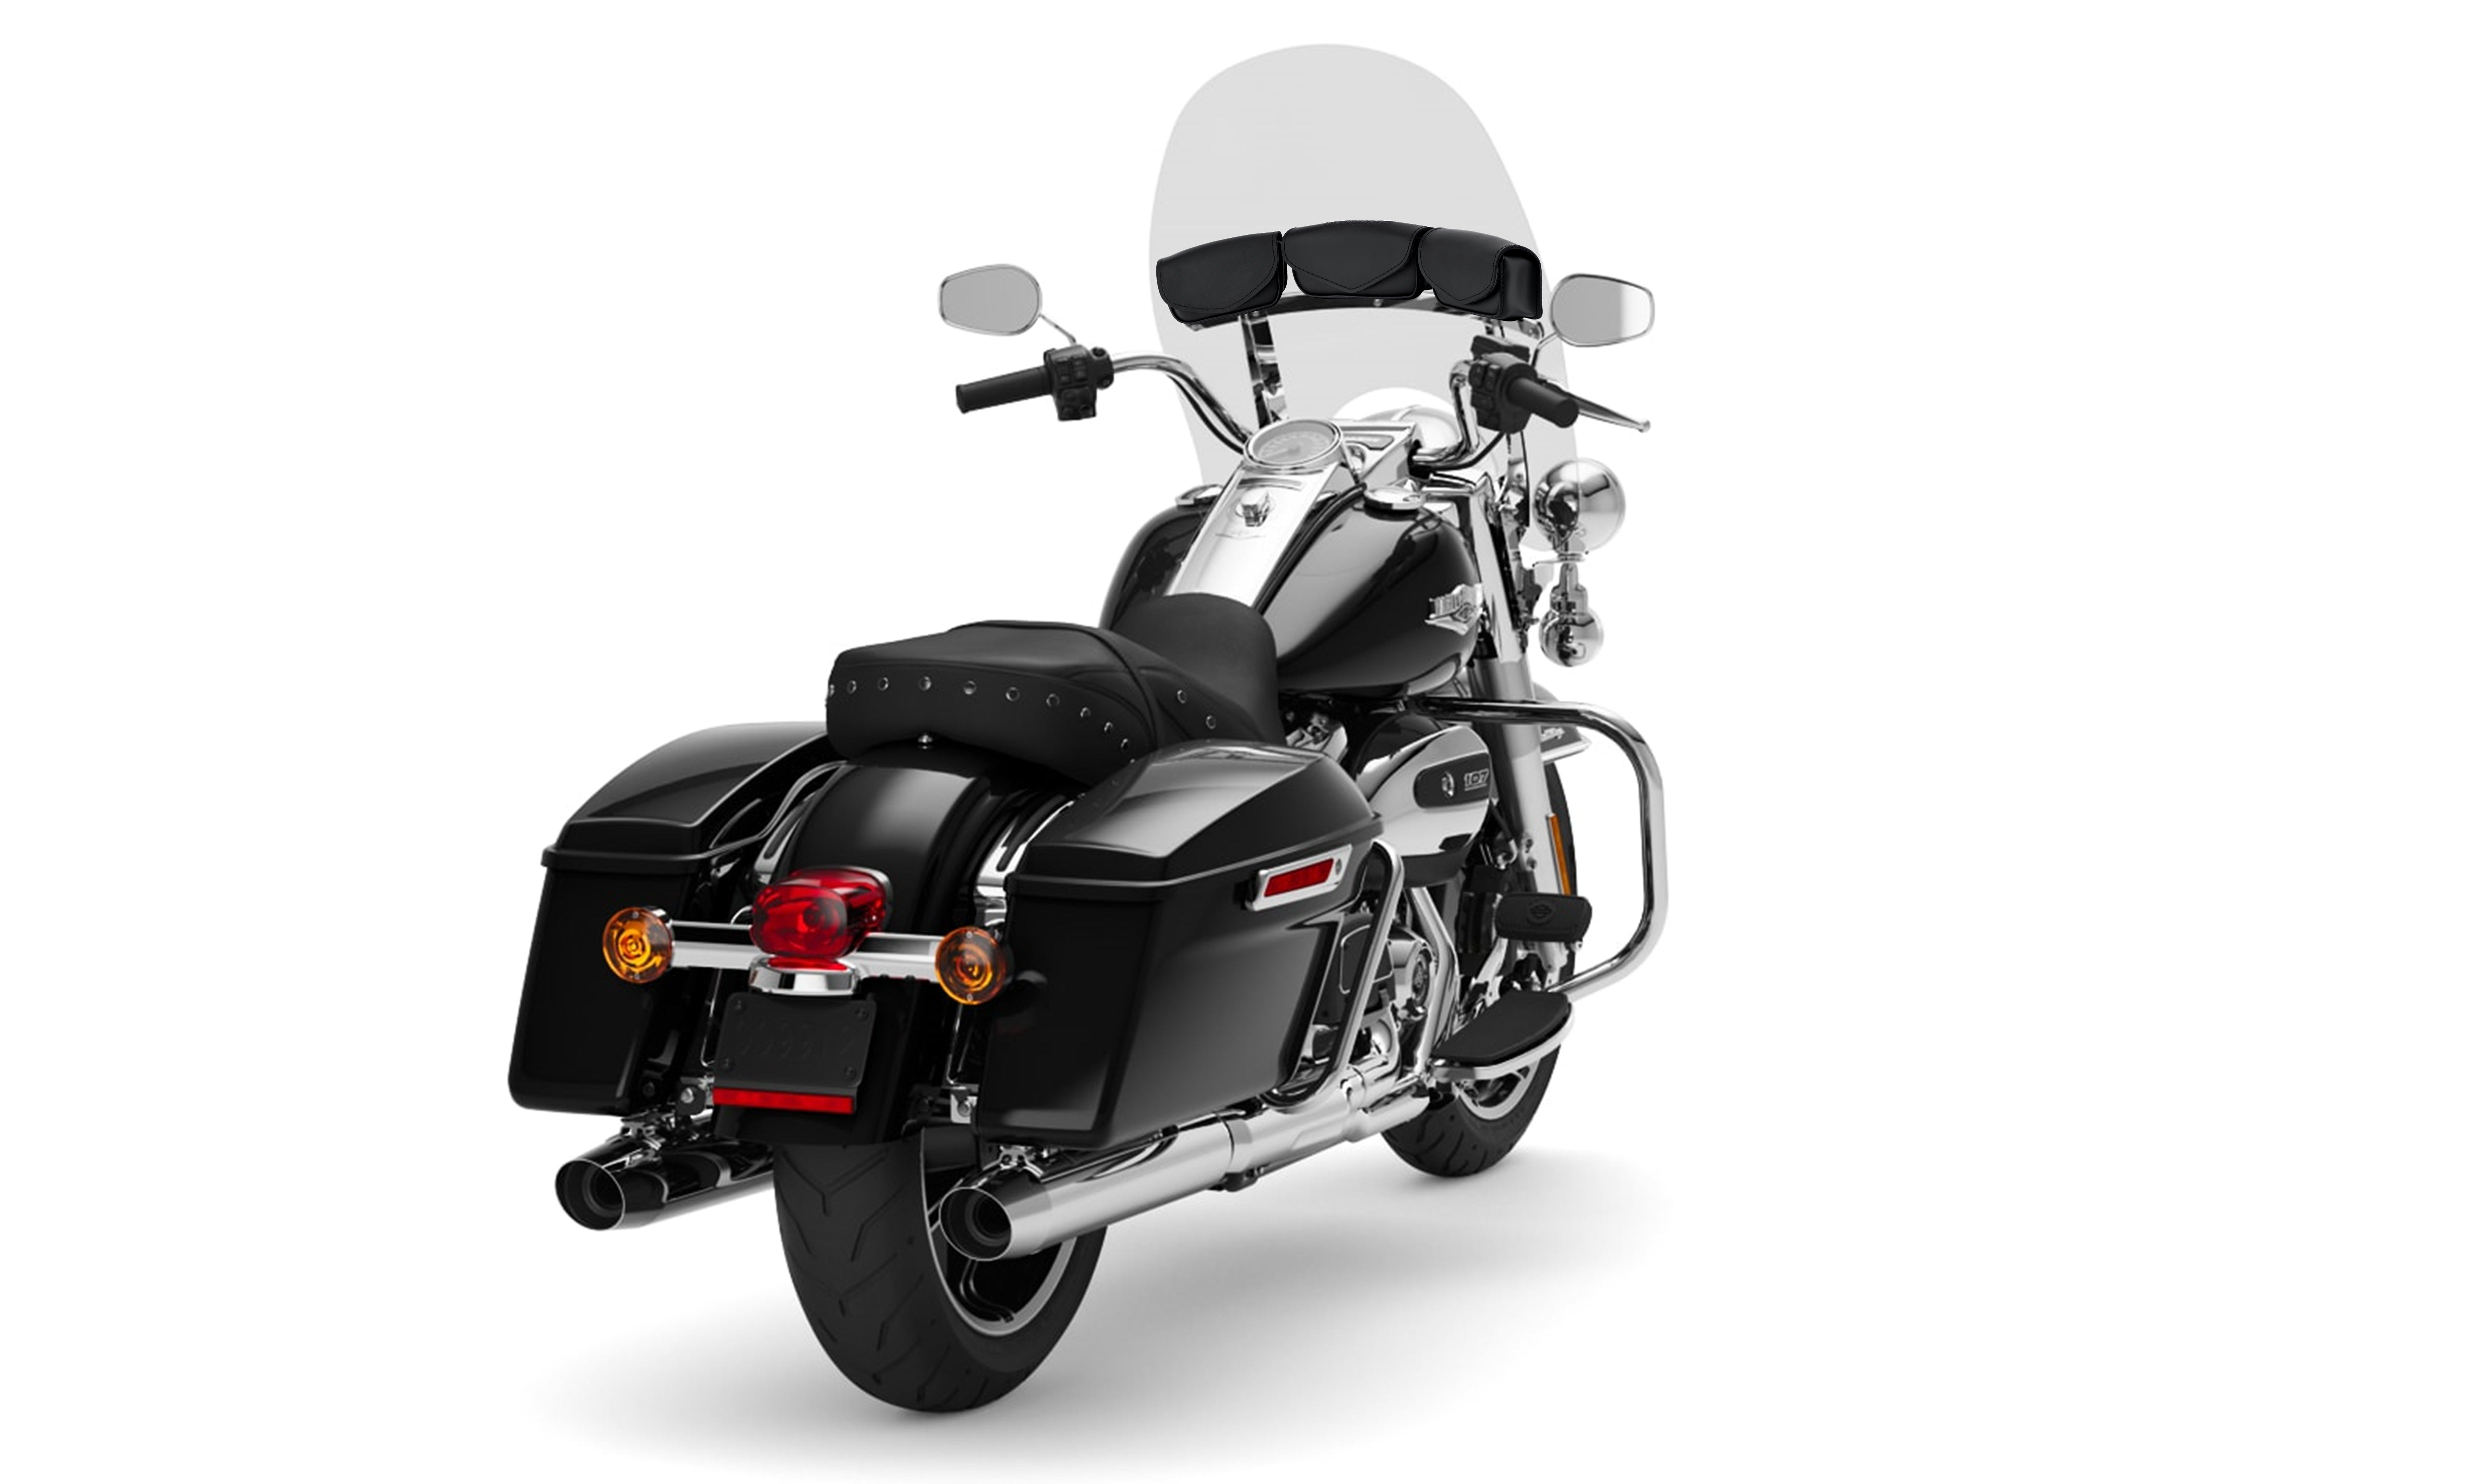 Viking Trident Tri-Pocket Motorcycle Windshield Bag for Harley Touring Bag on Bike View @expand